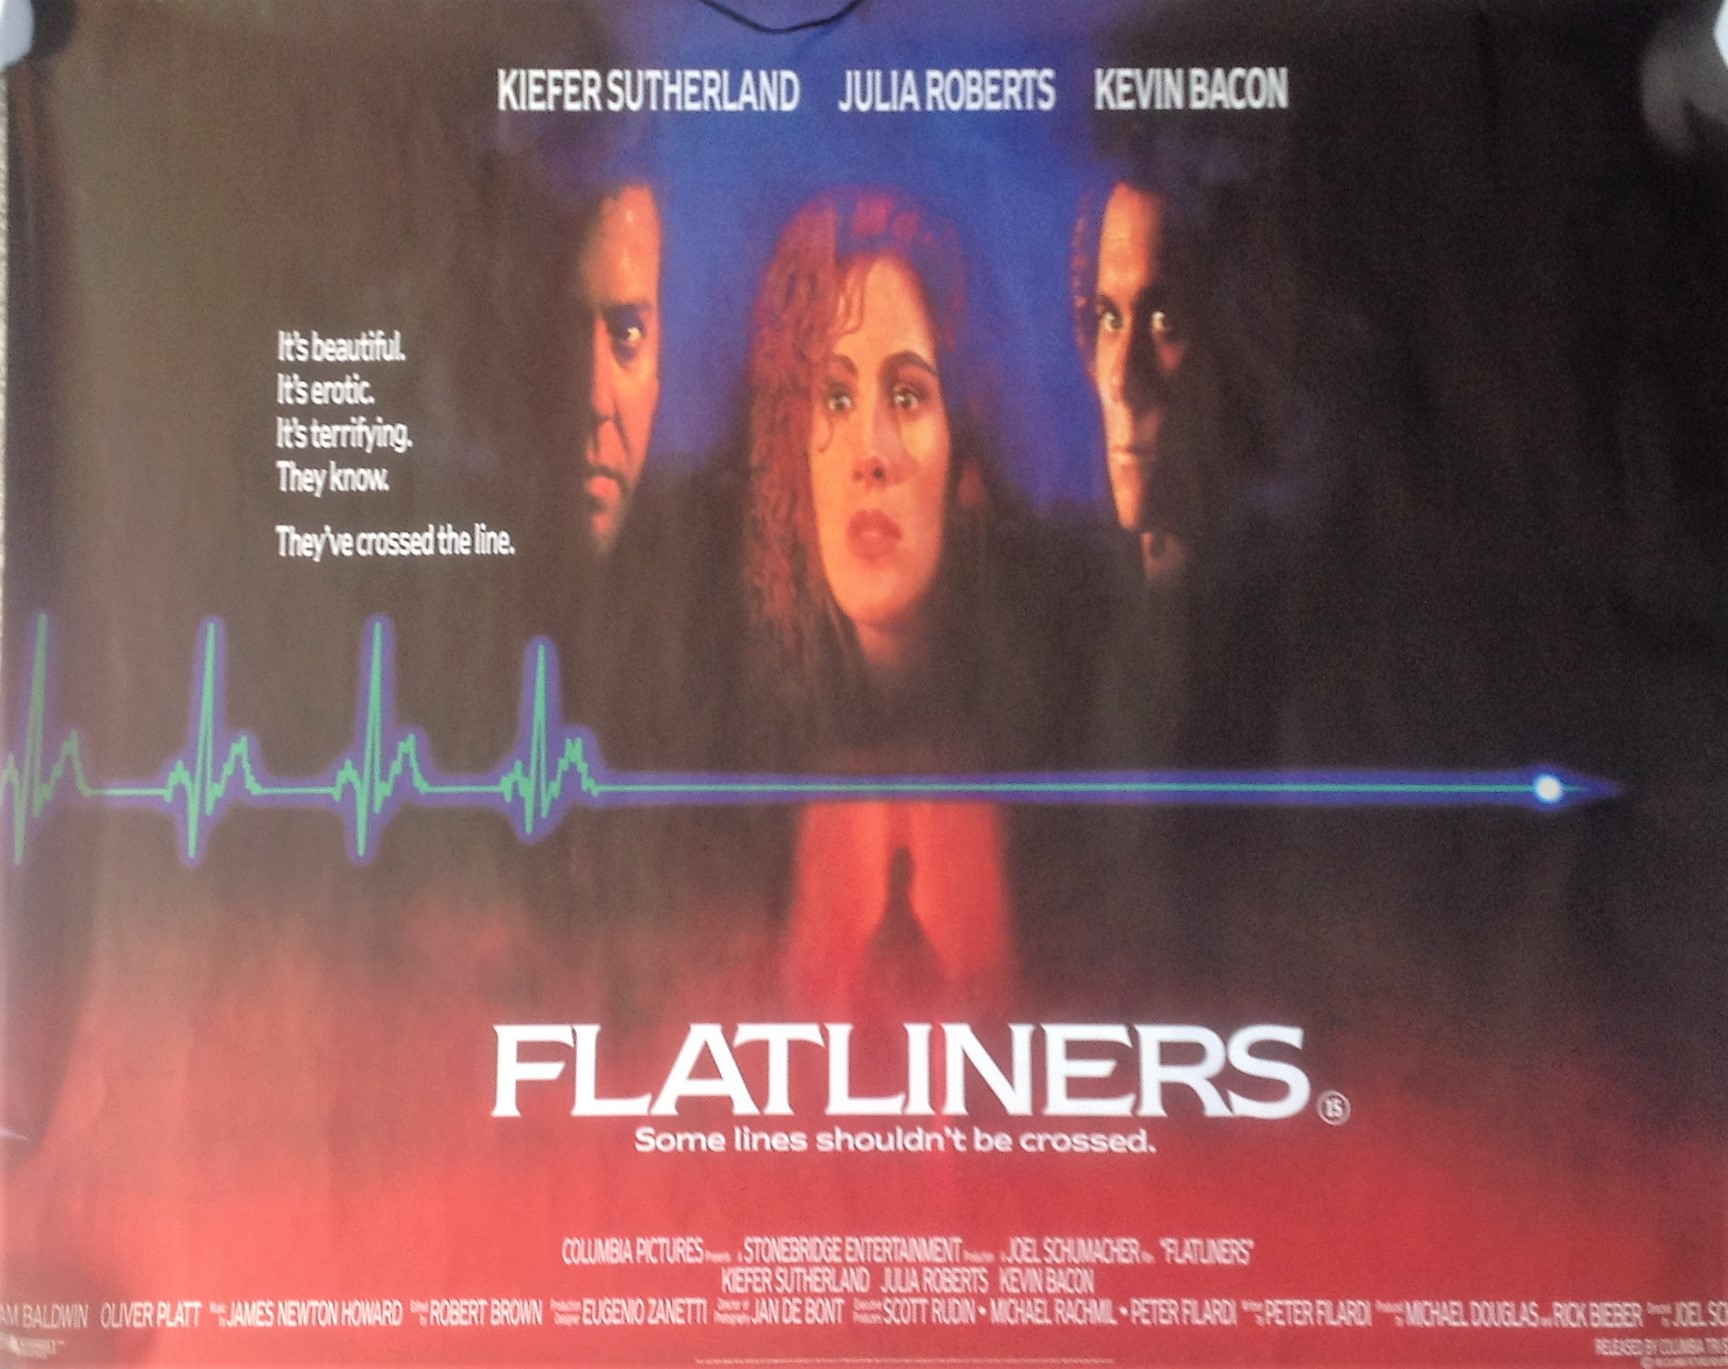 Flatliners 40x30 movie poster 1990 American science fiction psychological horror film directed by